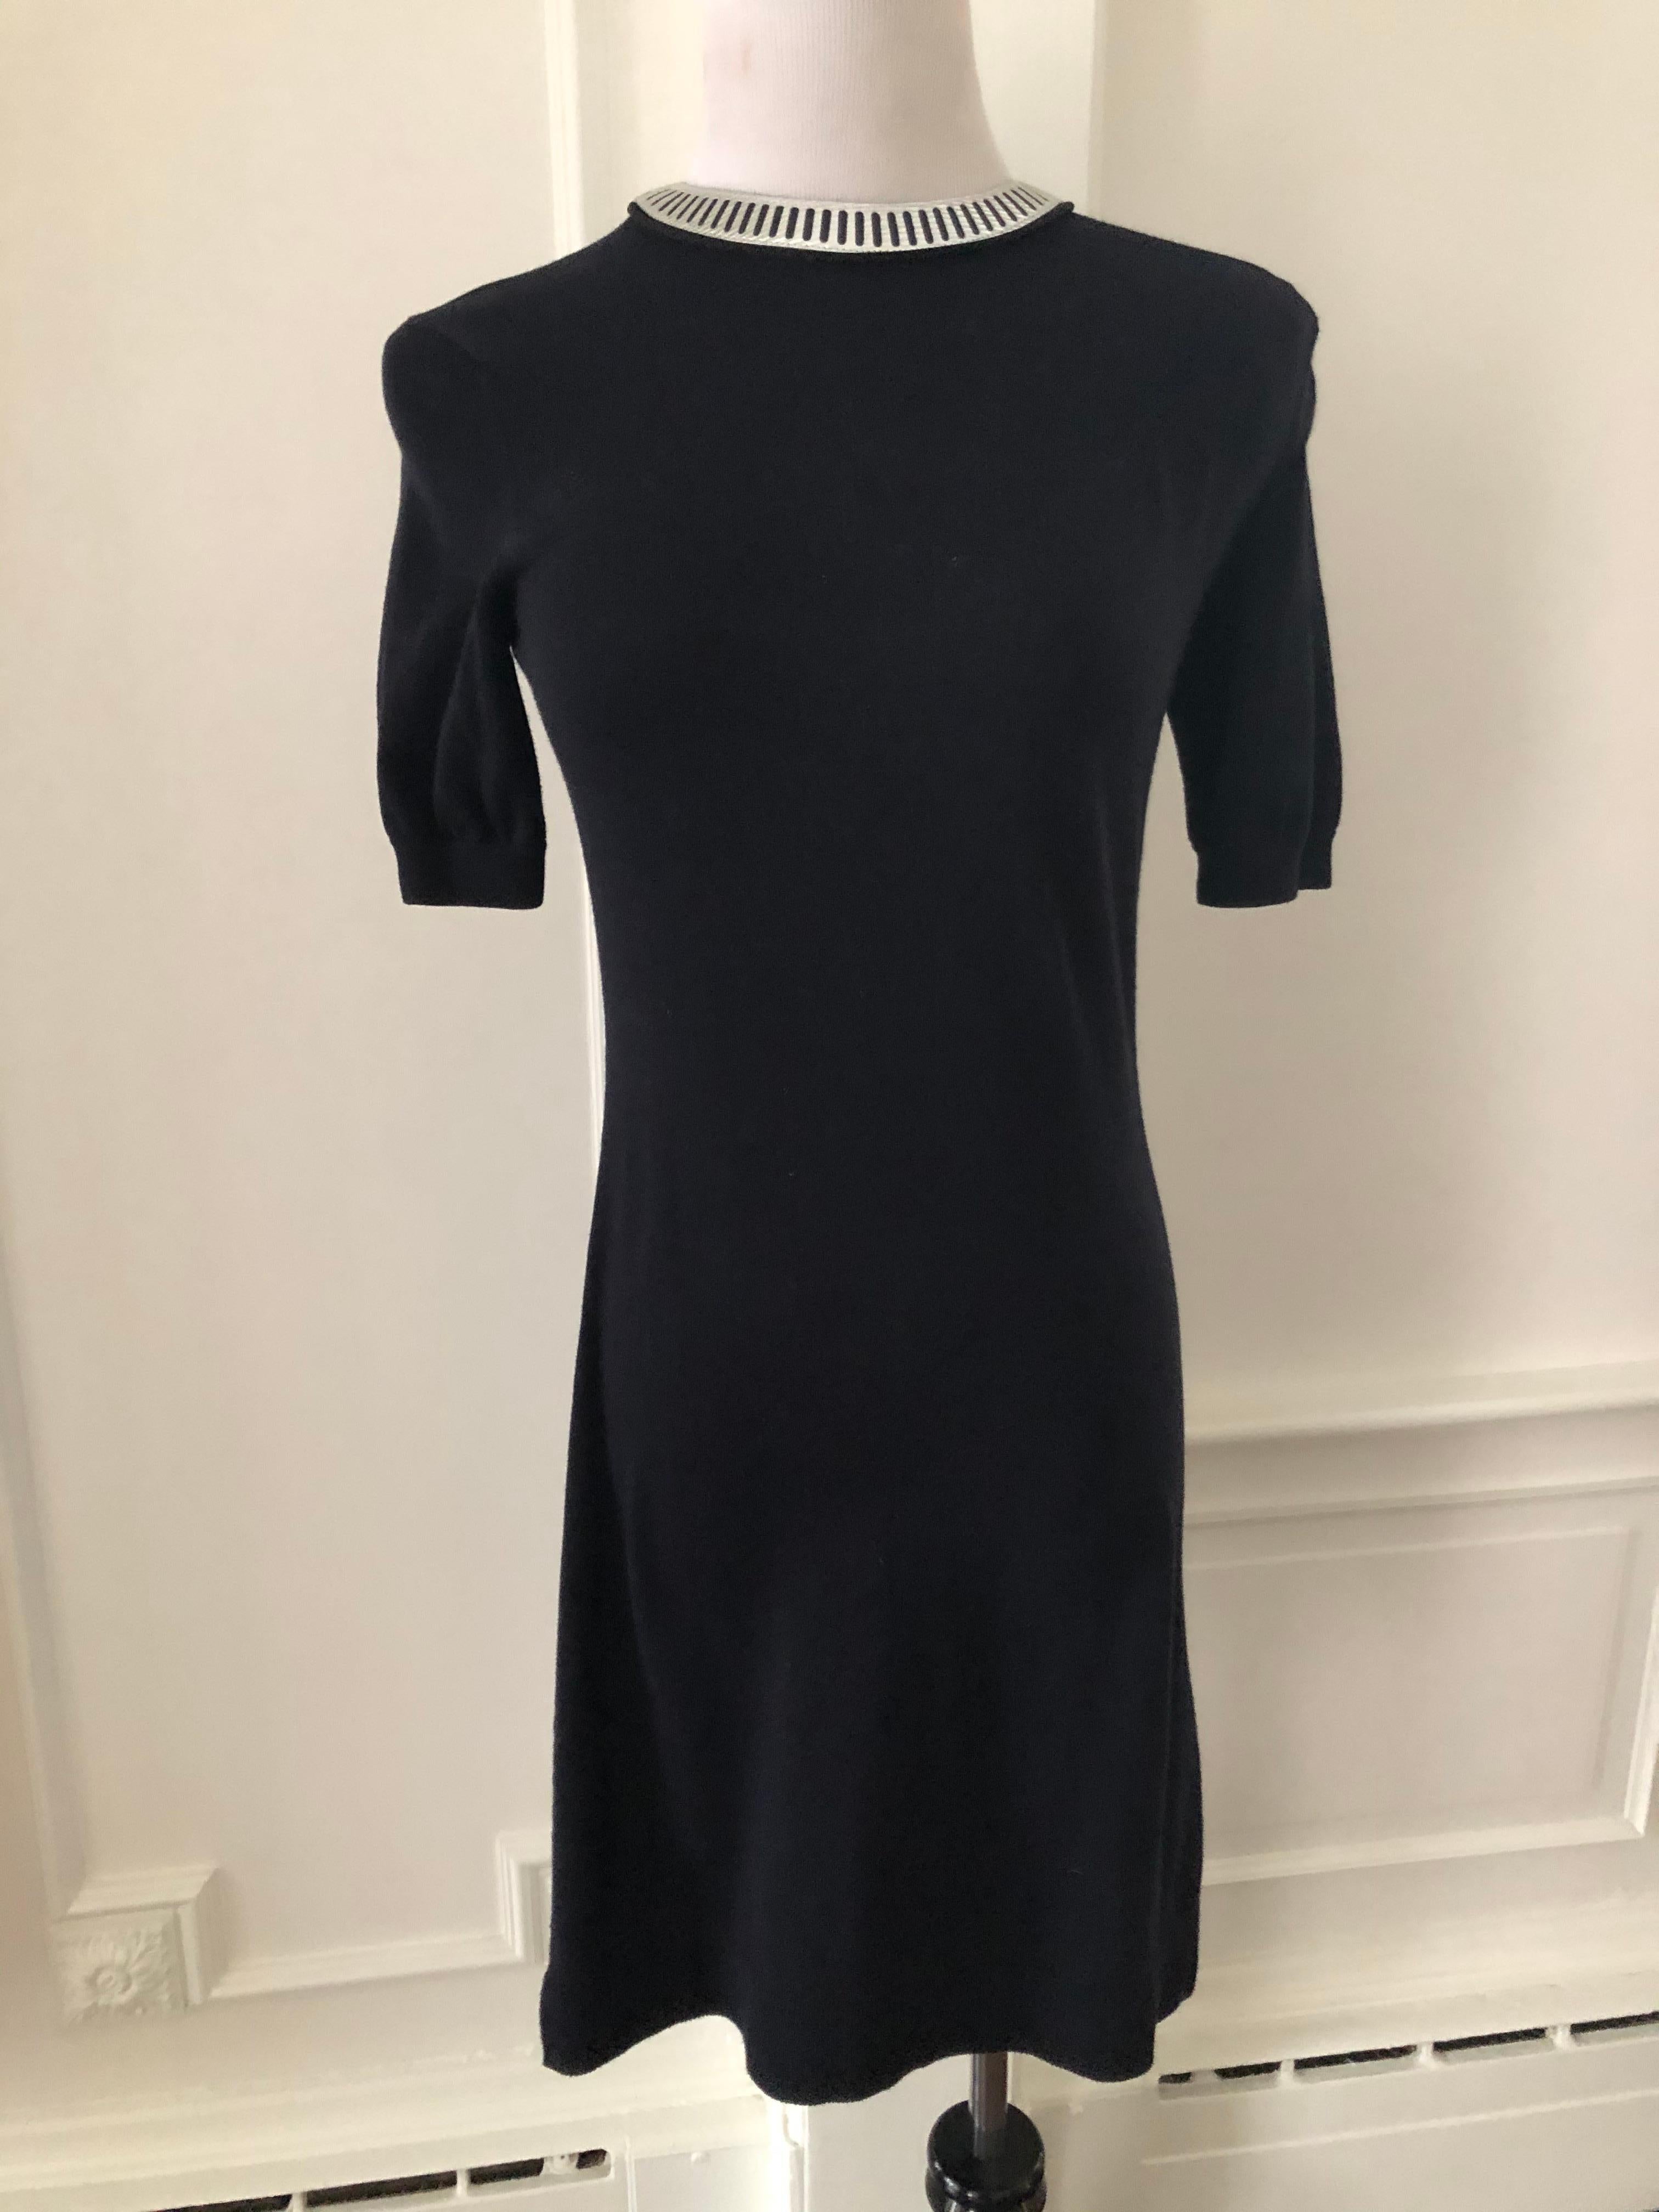 Sort sleeve navy cotton knit dress. Back hook and eye closure.
Silver embellishment at neckline.
Simple and chic. Very good condition.
Measurements
Shoulders       18